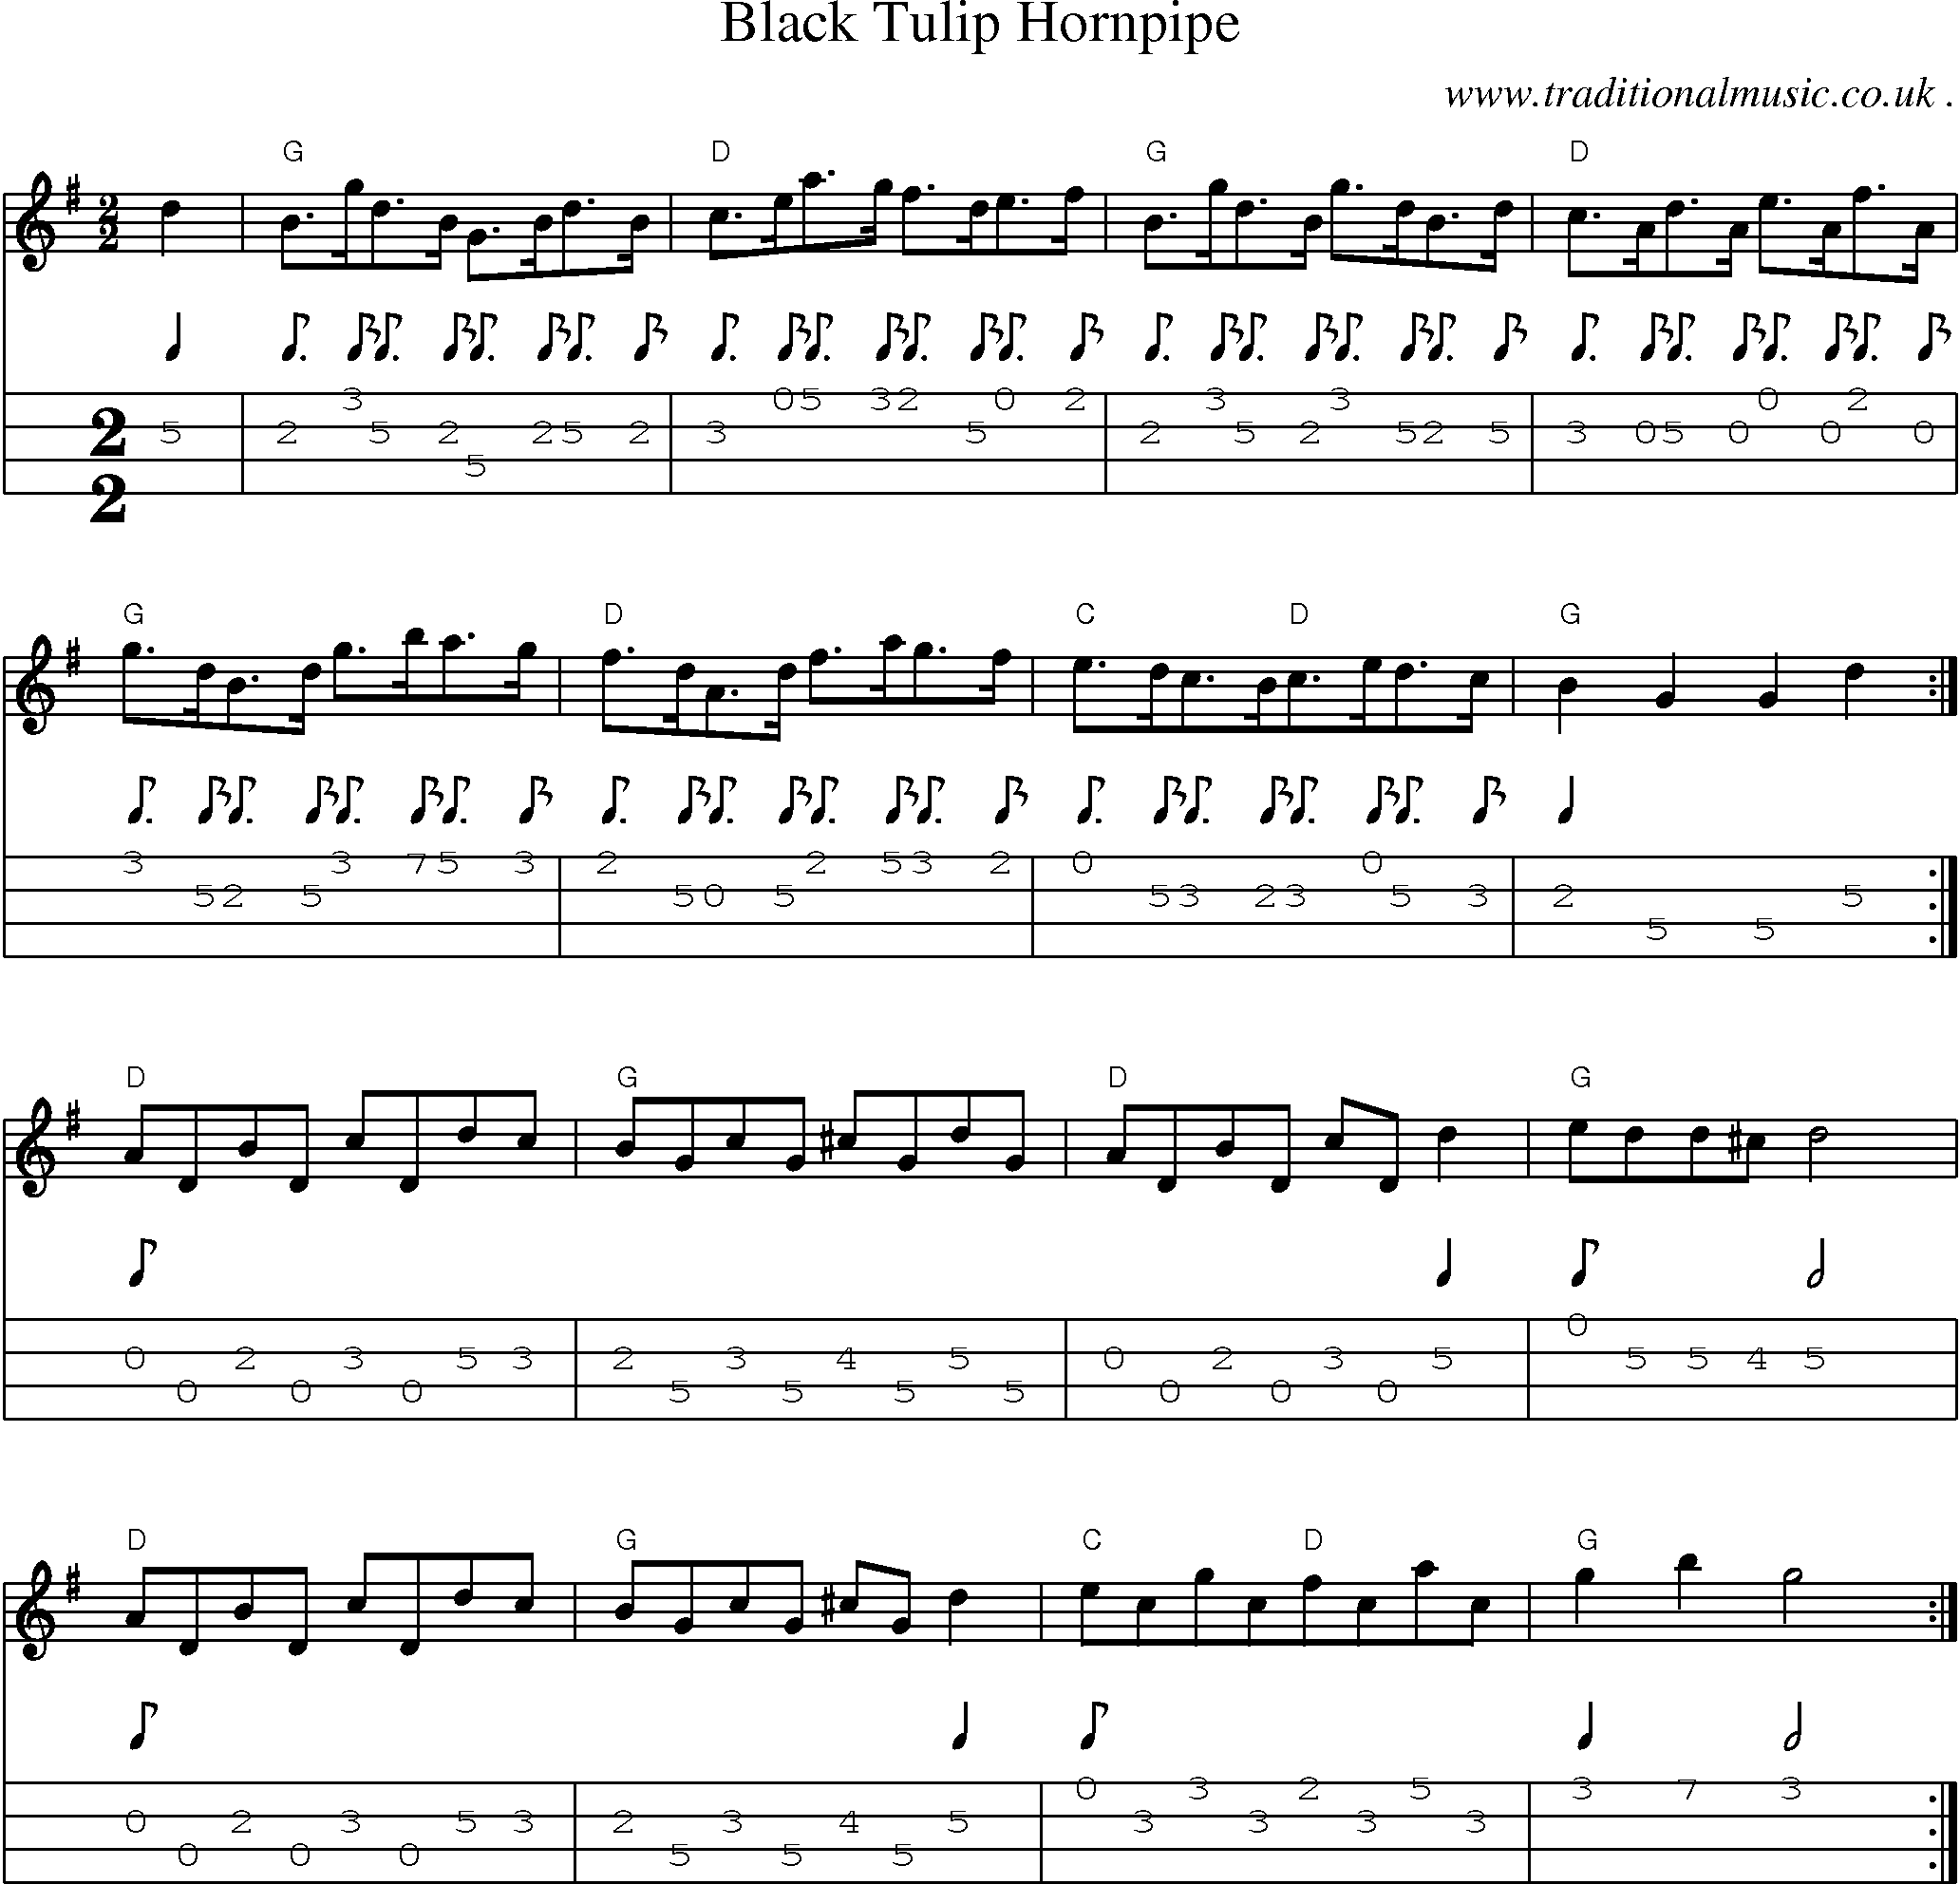 Sheet-Music and Mandolin Tabs for Black Tulip Hornpipe